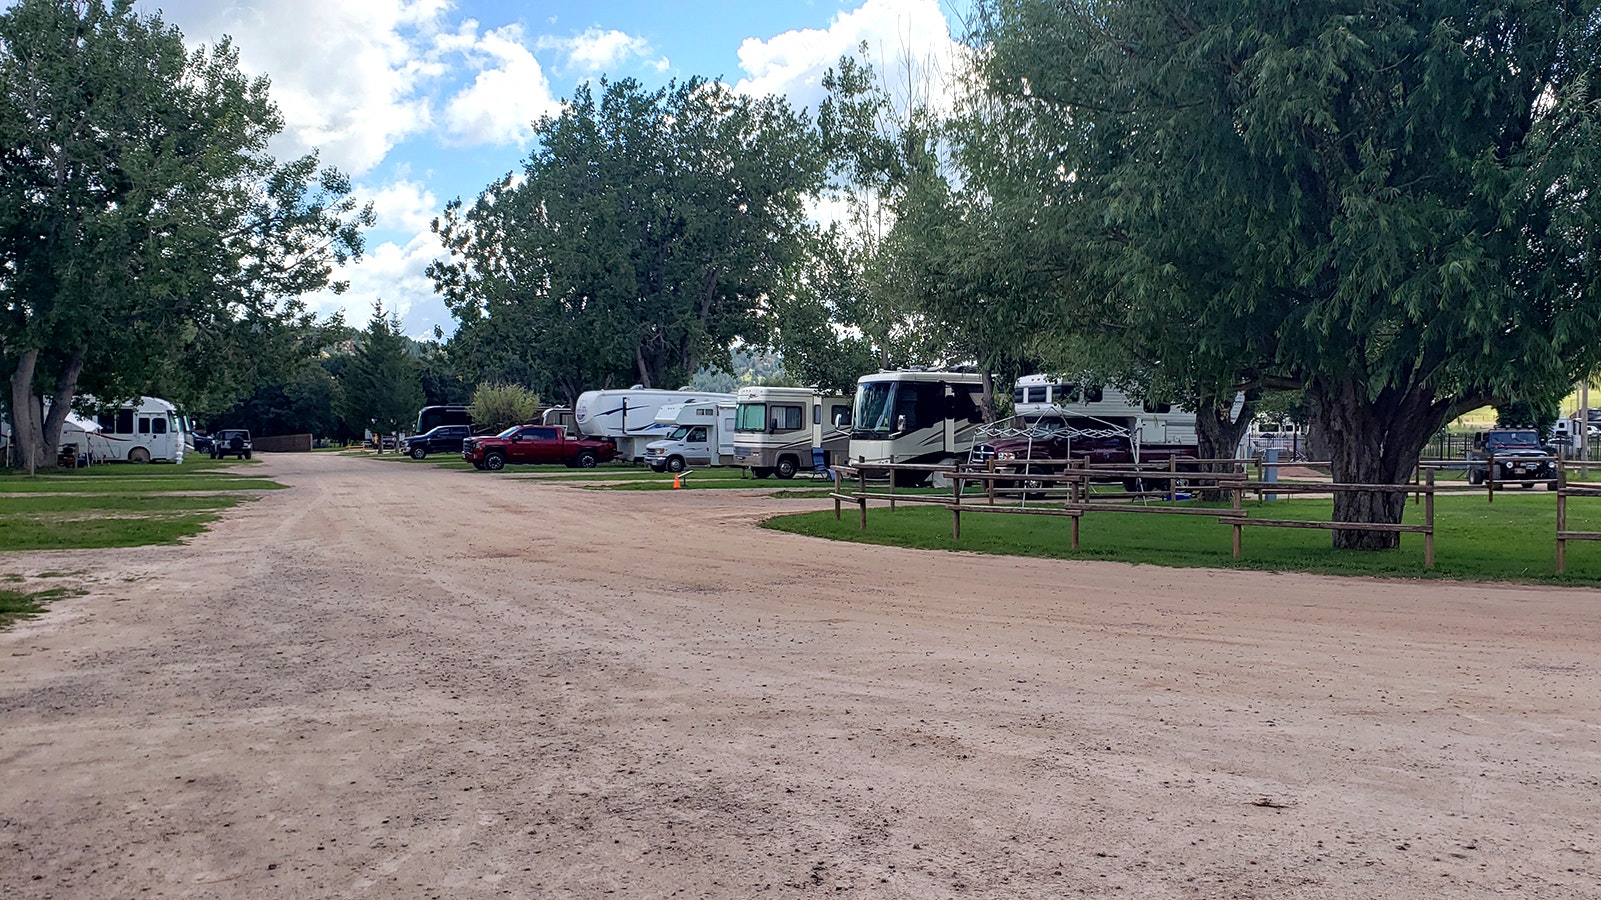 Devils Tower KOA has about 100 camping sites as well as space for about 50 tent sites.